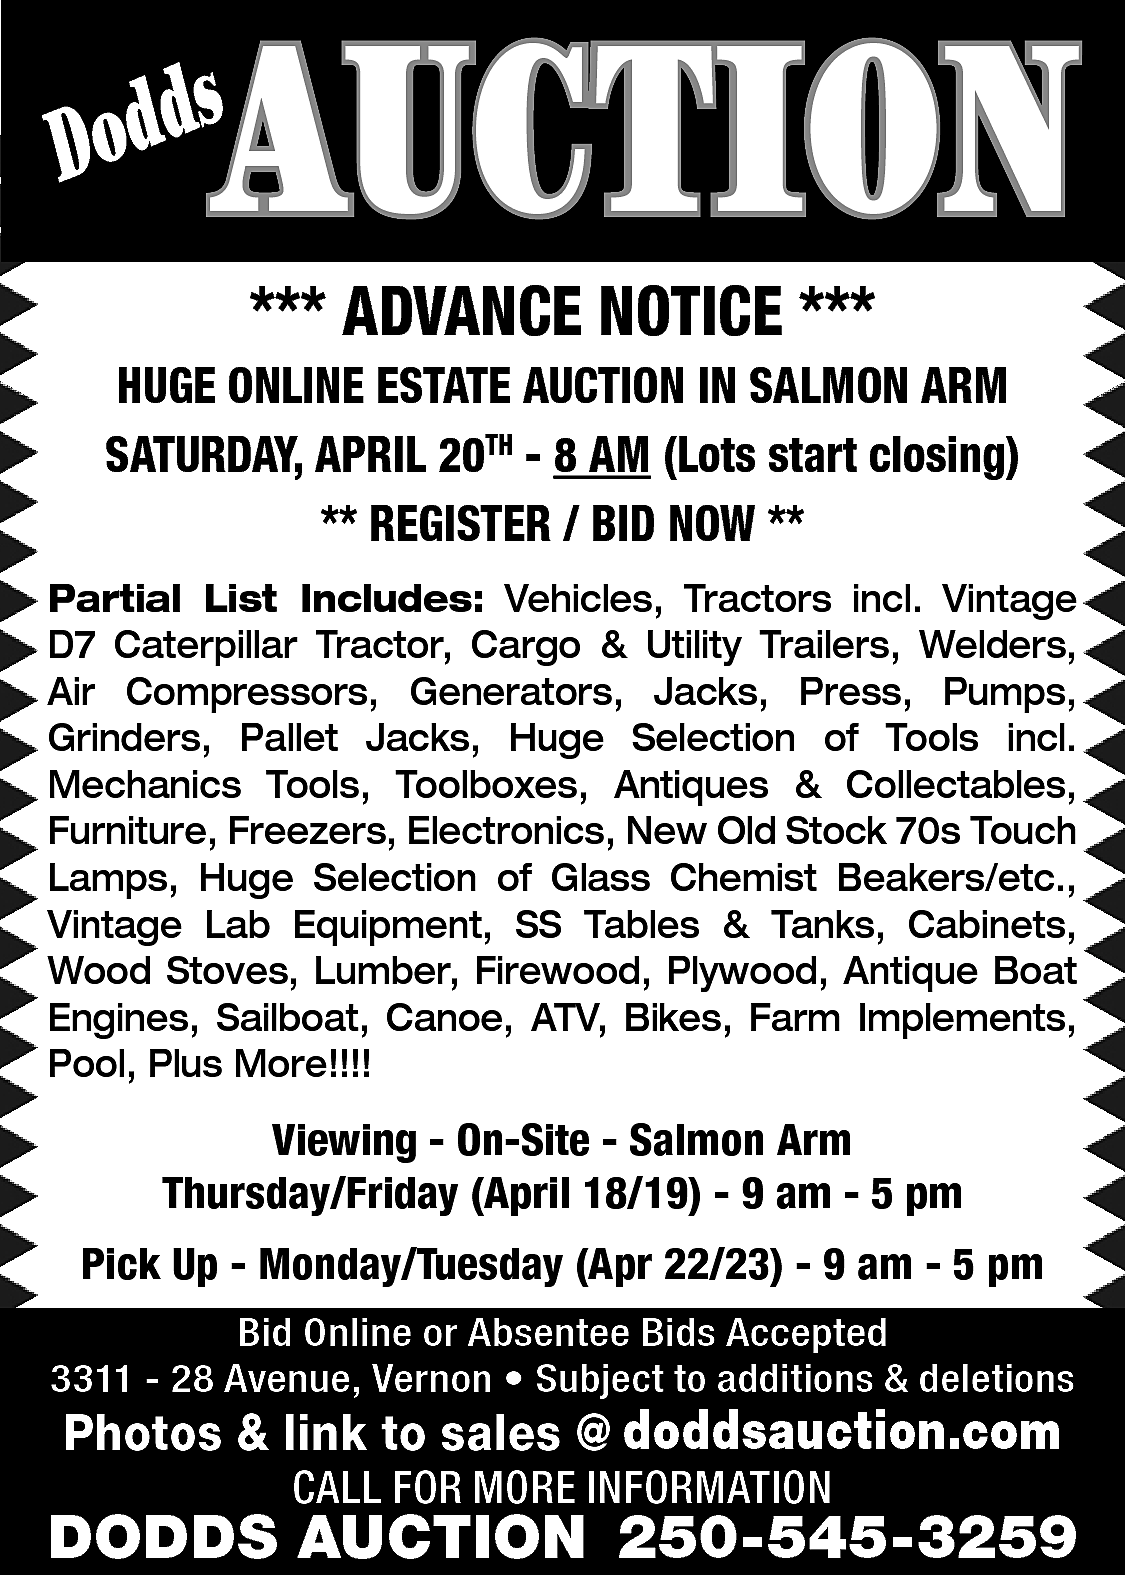 AUCTION <br> <br>s <br>Dodd <br>  AUCTION    s  Dodd    *** ADVANCE NOTICE ***    HUGE ONLINE ESTATE AUCTION IN SALMON ARM  SATURDAY, APRIL 20TH - 8 AM (Lots start closing)  ** REGISTER / BID NOW **  Partial List Includes: Vehicles, Tractors incl. Vintage  D7 Caterpillar Tractor, Cargo & Utility Trailers, Welders,  Air Compressors, Generators, Jacks, Press, Pumps,  Grinders, Pallet Jacks, Huge Selection of Tools incl.  Mechanics Tools, Toolboxes, Antiques & Collectables,  Furniture, Freezers, Electronics, New Old Stock 70s Touch  Lamps, Huge Selection of Glass Chemist Beakers/etc.,  Vintage Lab Equipment, SS Tables & Tanks, Cabinets,  Wood Stoves, Lumber, Firewood, Plywood, Antique Boat  Engines, Sailboat, Canoe, ATV, Bikes, Farm Implements,  Pool, Plus More!!!!    Viewing - On-Site - Salmon Arm  Thursday/Friday (April 18/19) - 9 am - 5 pm  Pick Up - Monday/Tuesday (Apr 22/23) - 9 am - 5 pm  Bid Online or Absentee Bids Accepted  3311 - 28 Avenue, Vernon • Subject to additions & deletions    www.doddsauction.com  Photos & link to sales @  doddsauction.com  CALL FOR MORE INFORMATION    DODDS AUCTION 250-545-3259    